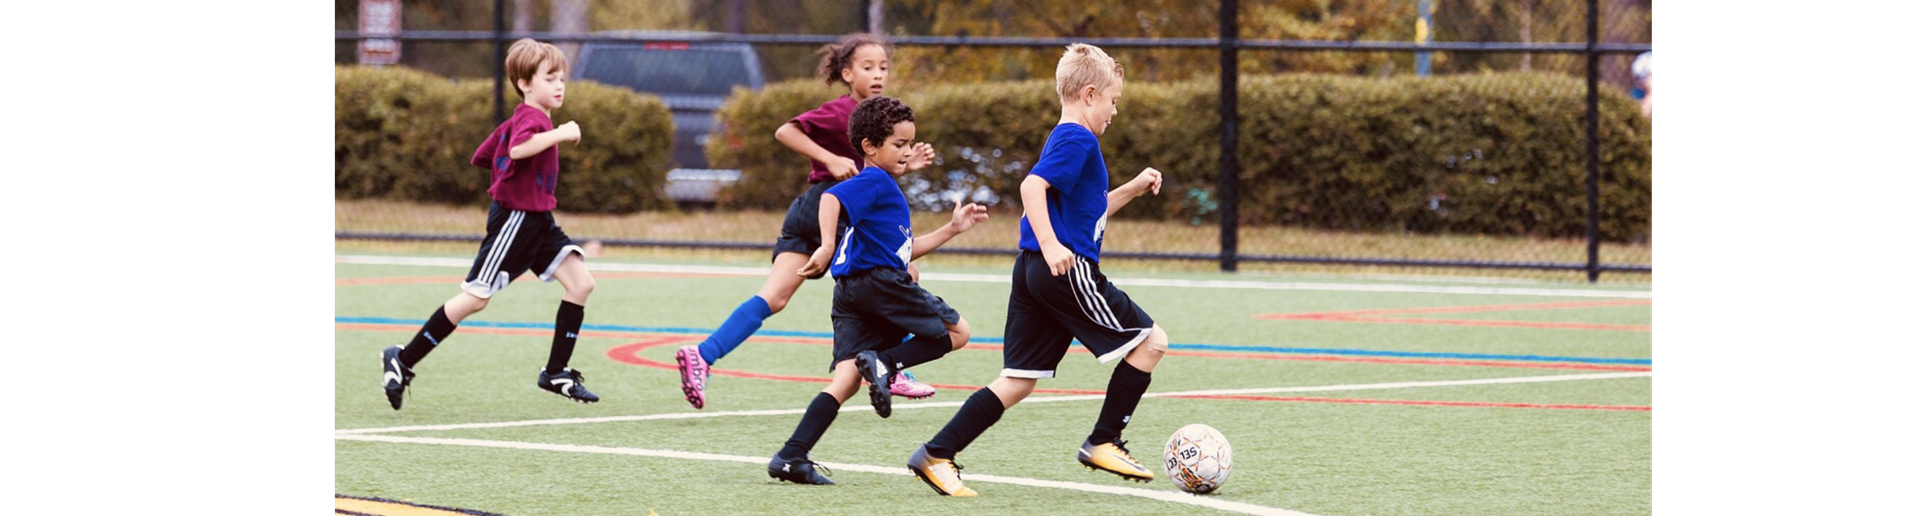 New to Soccer? Get started here!